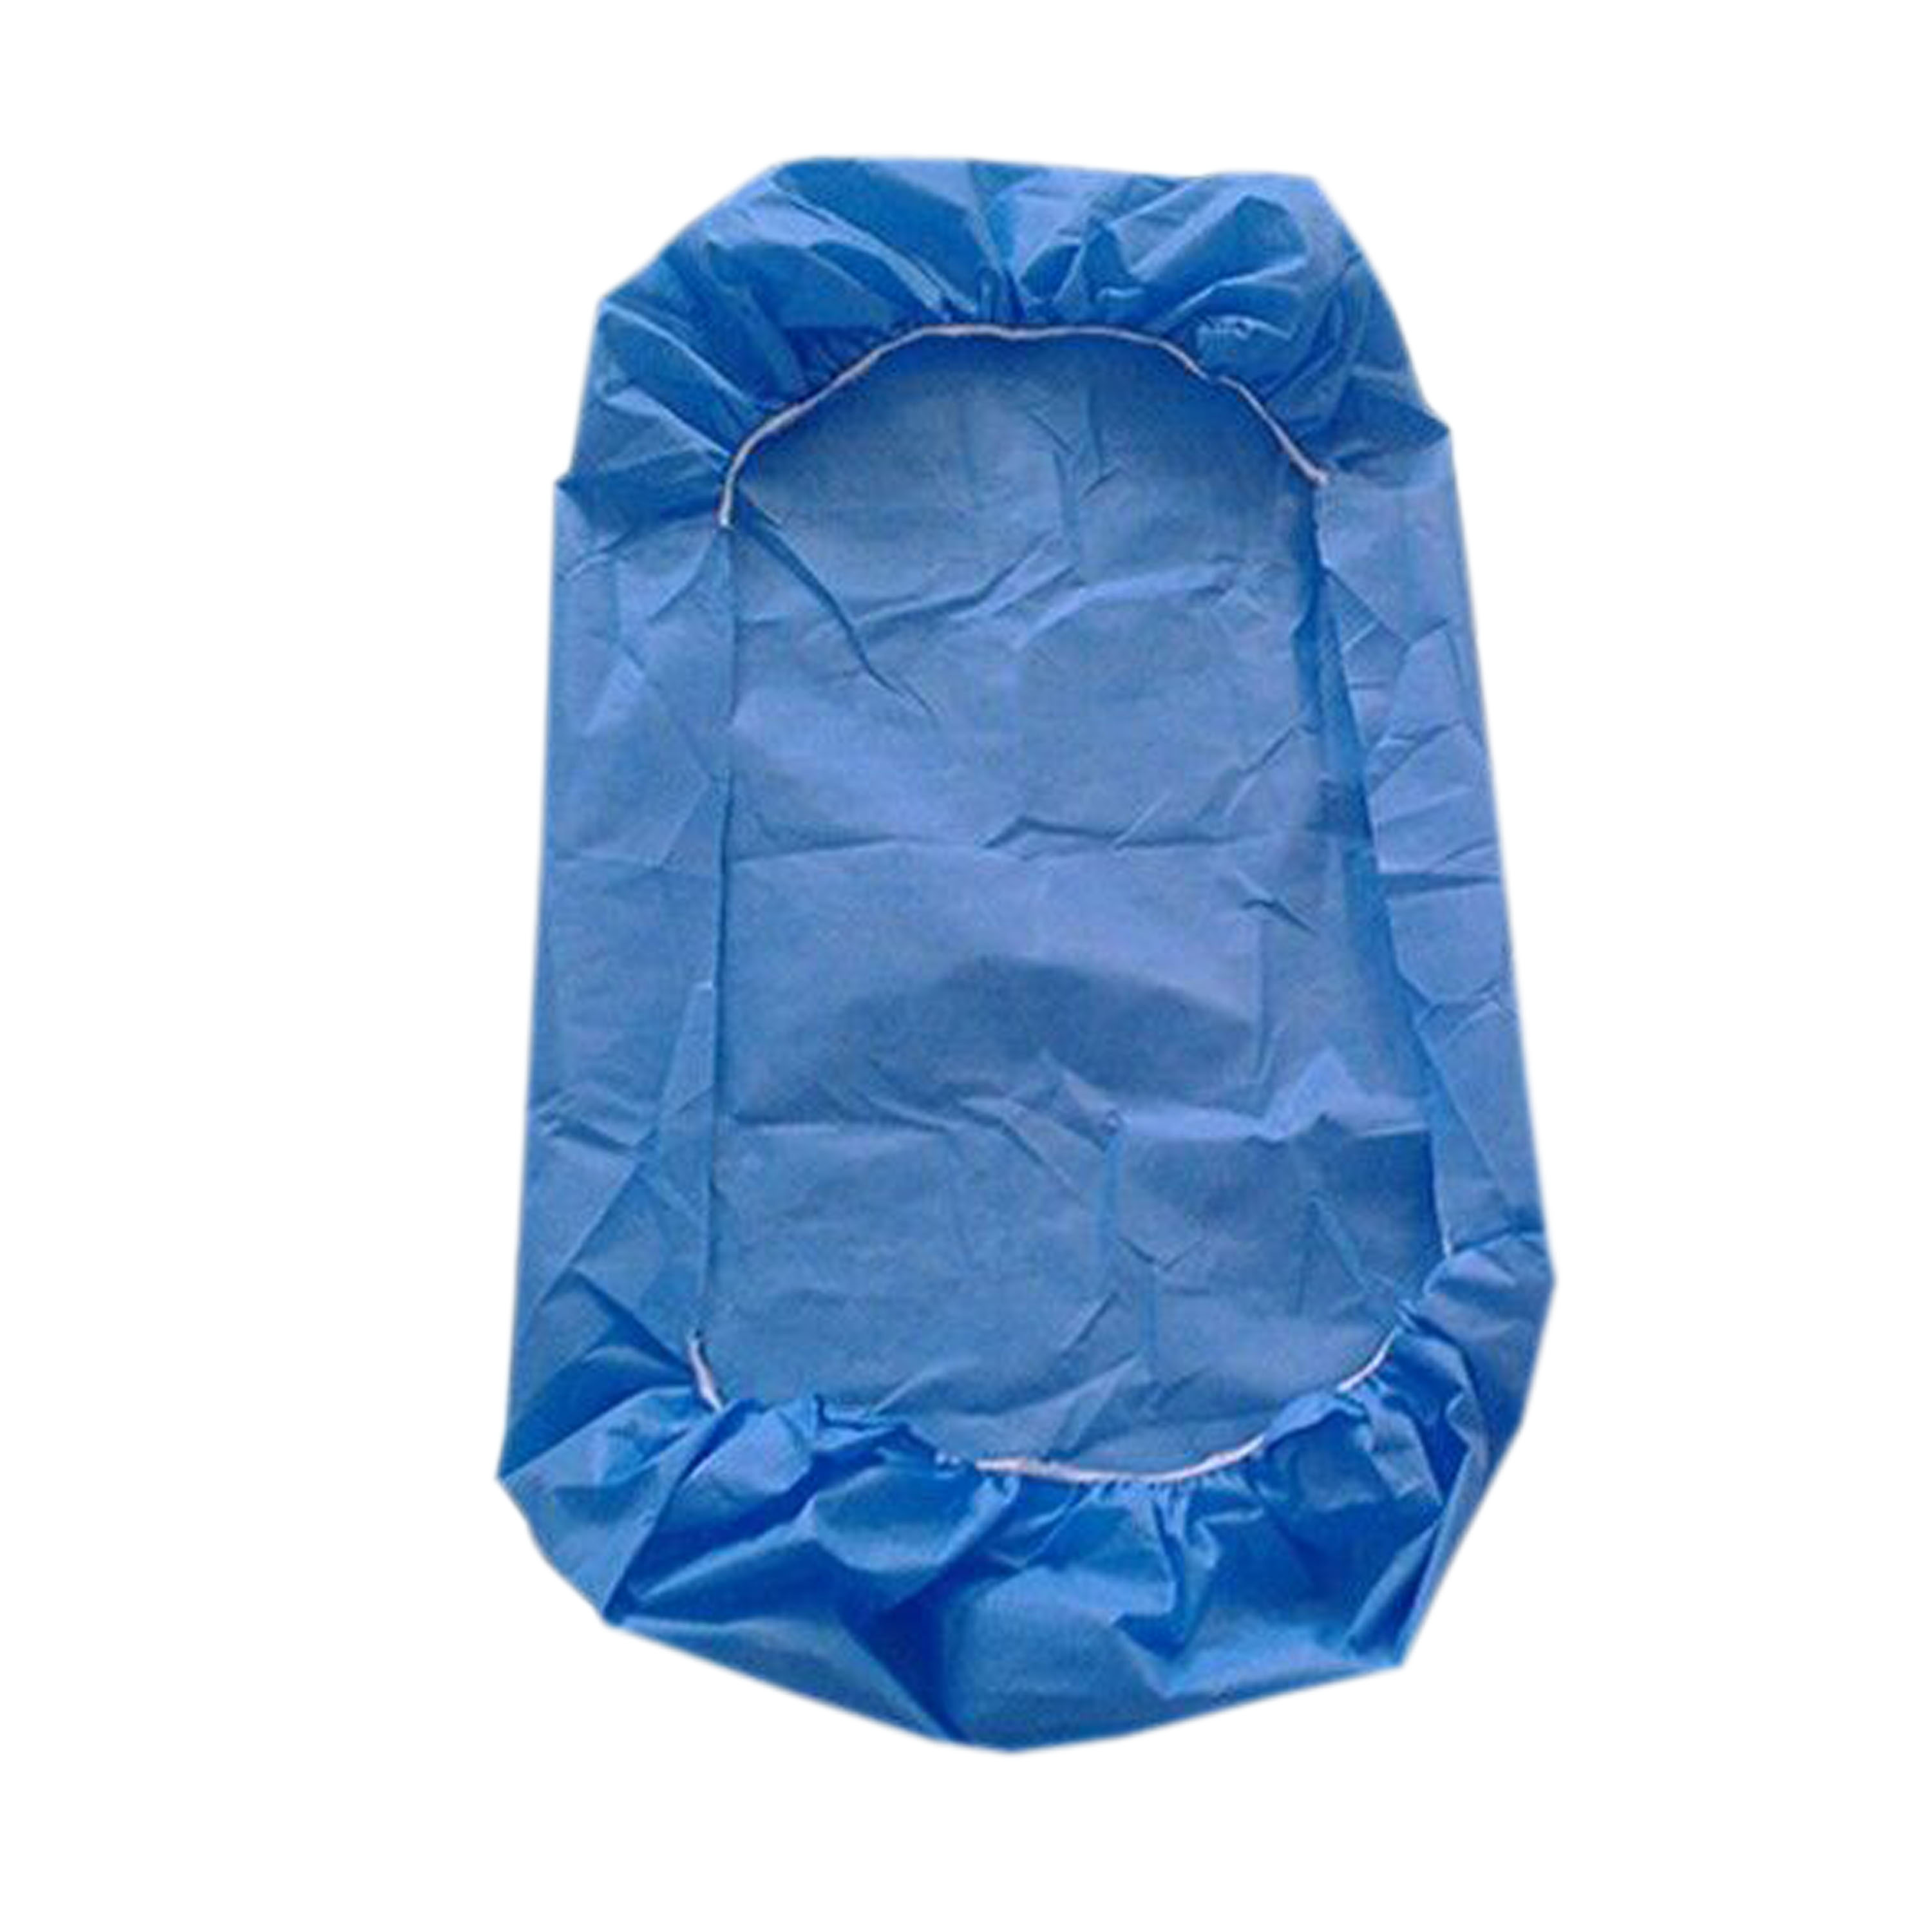 Disposable beauty salon use nonwoven bed cover with ties